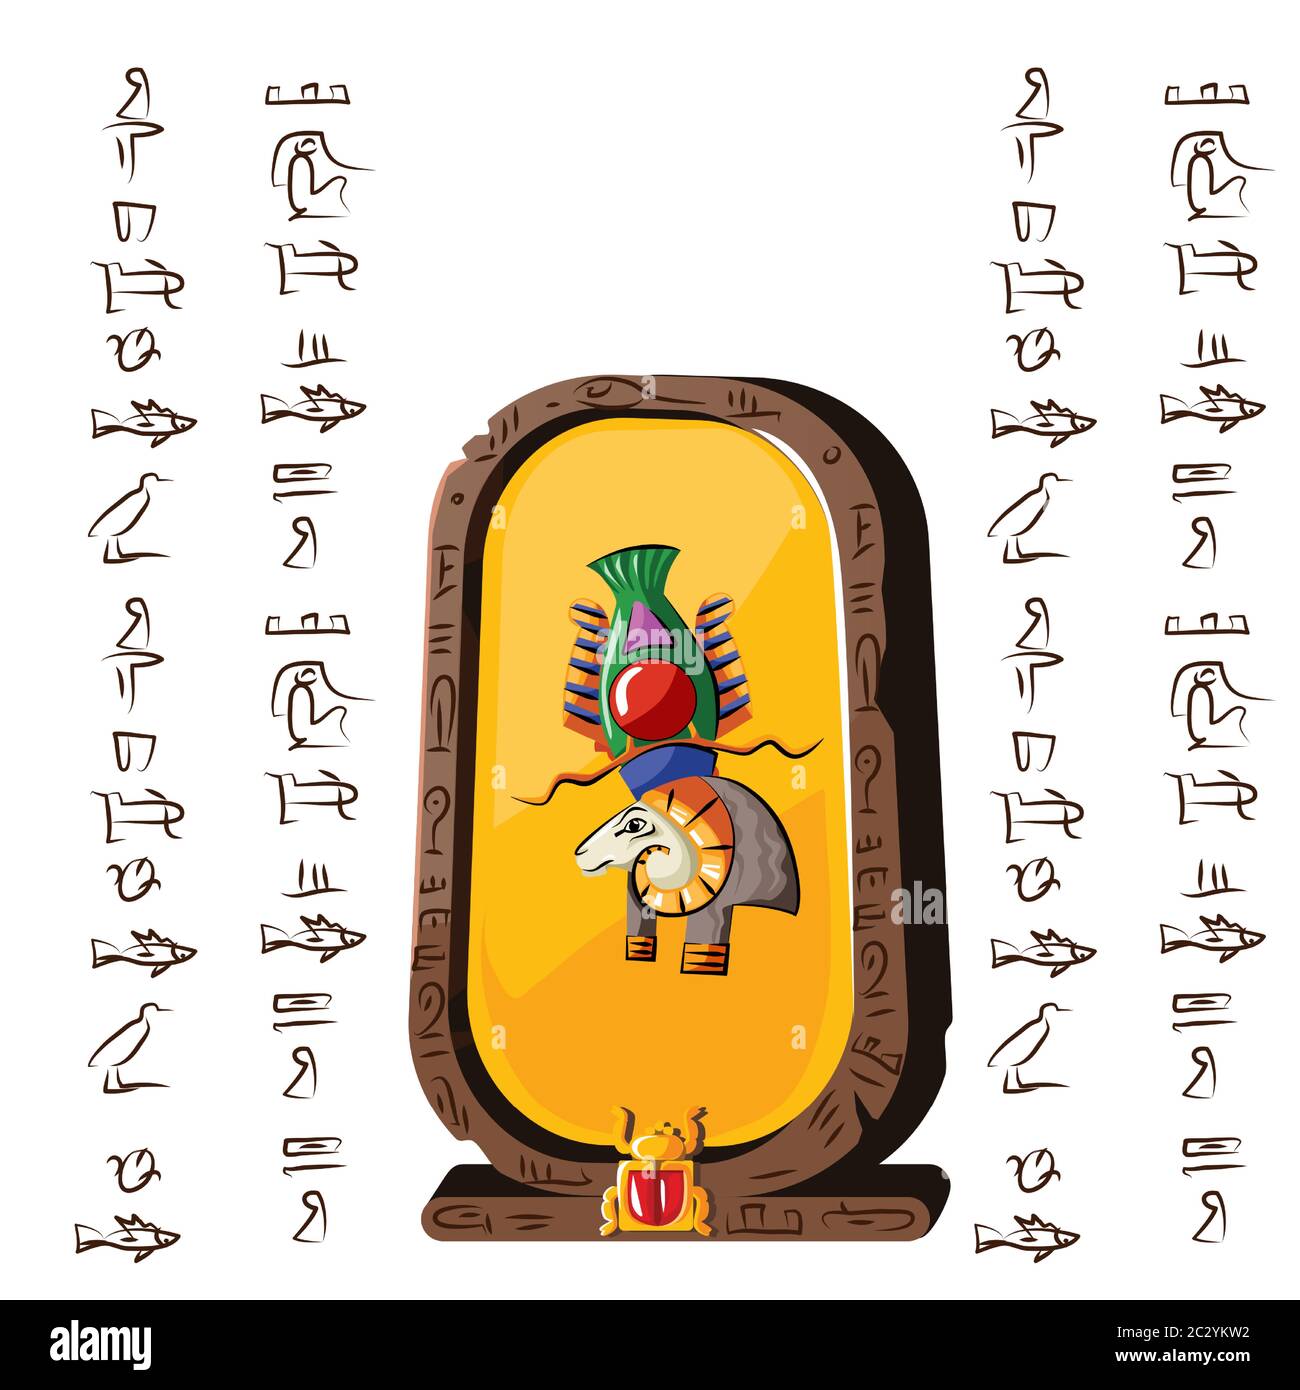 Stone board or clay plate with ram headed god and Egyptian hieroglyphs cartoon vector illustration. Ancient object for recording storing information, Stock Vector